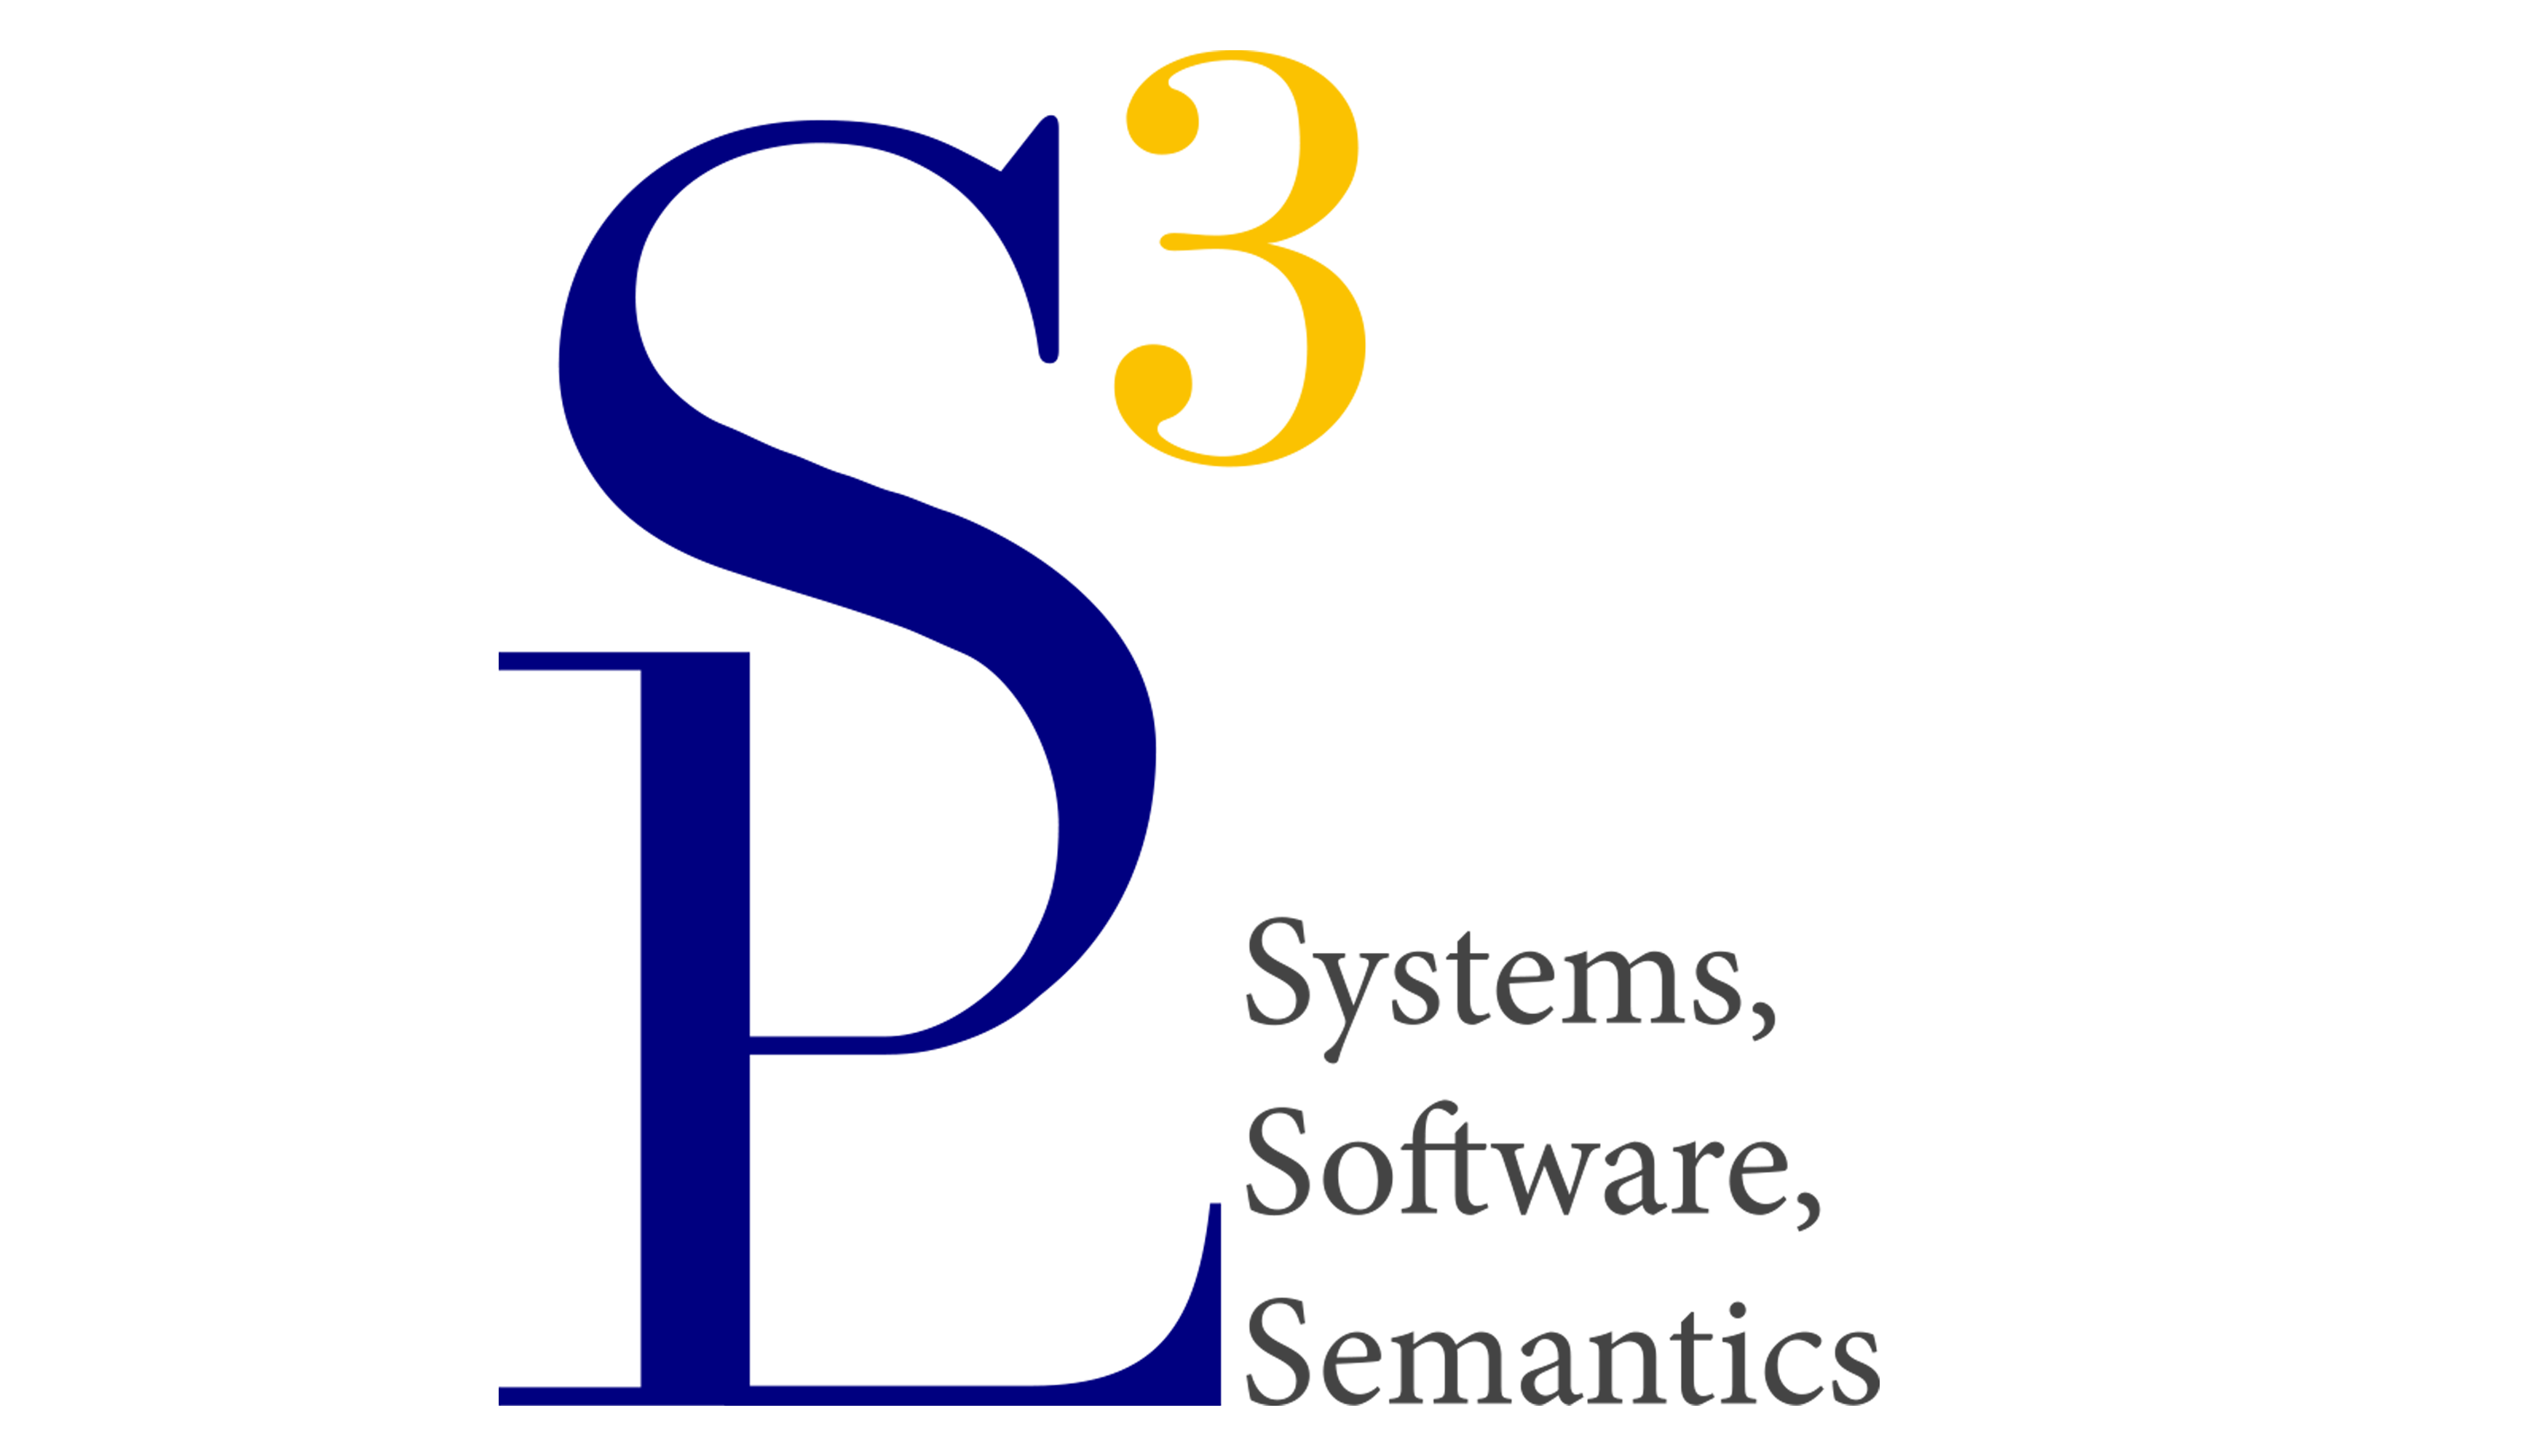 Laboratory for Systems, Software and Semantics (LS3)